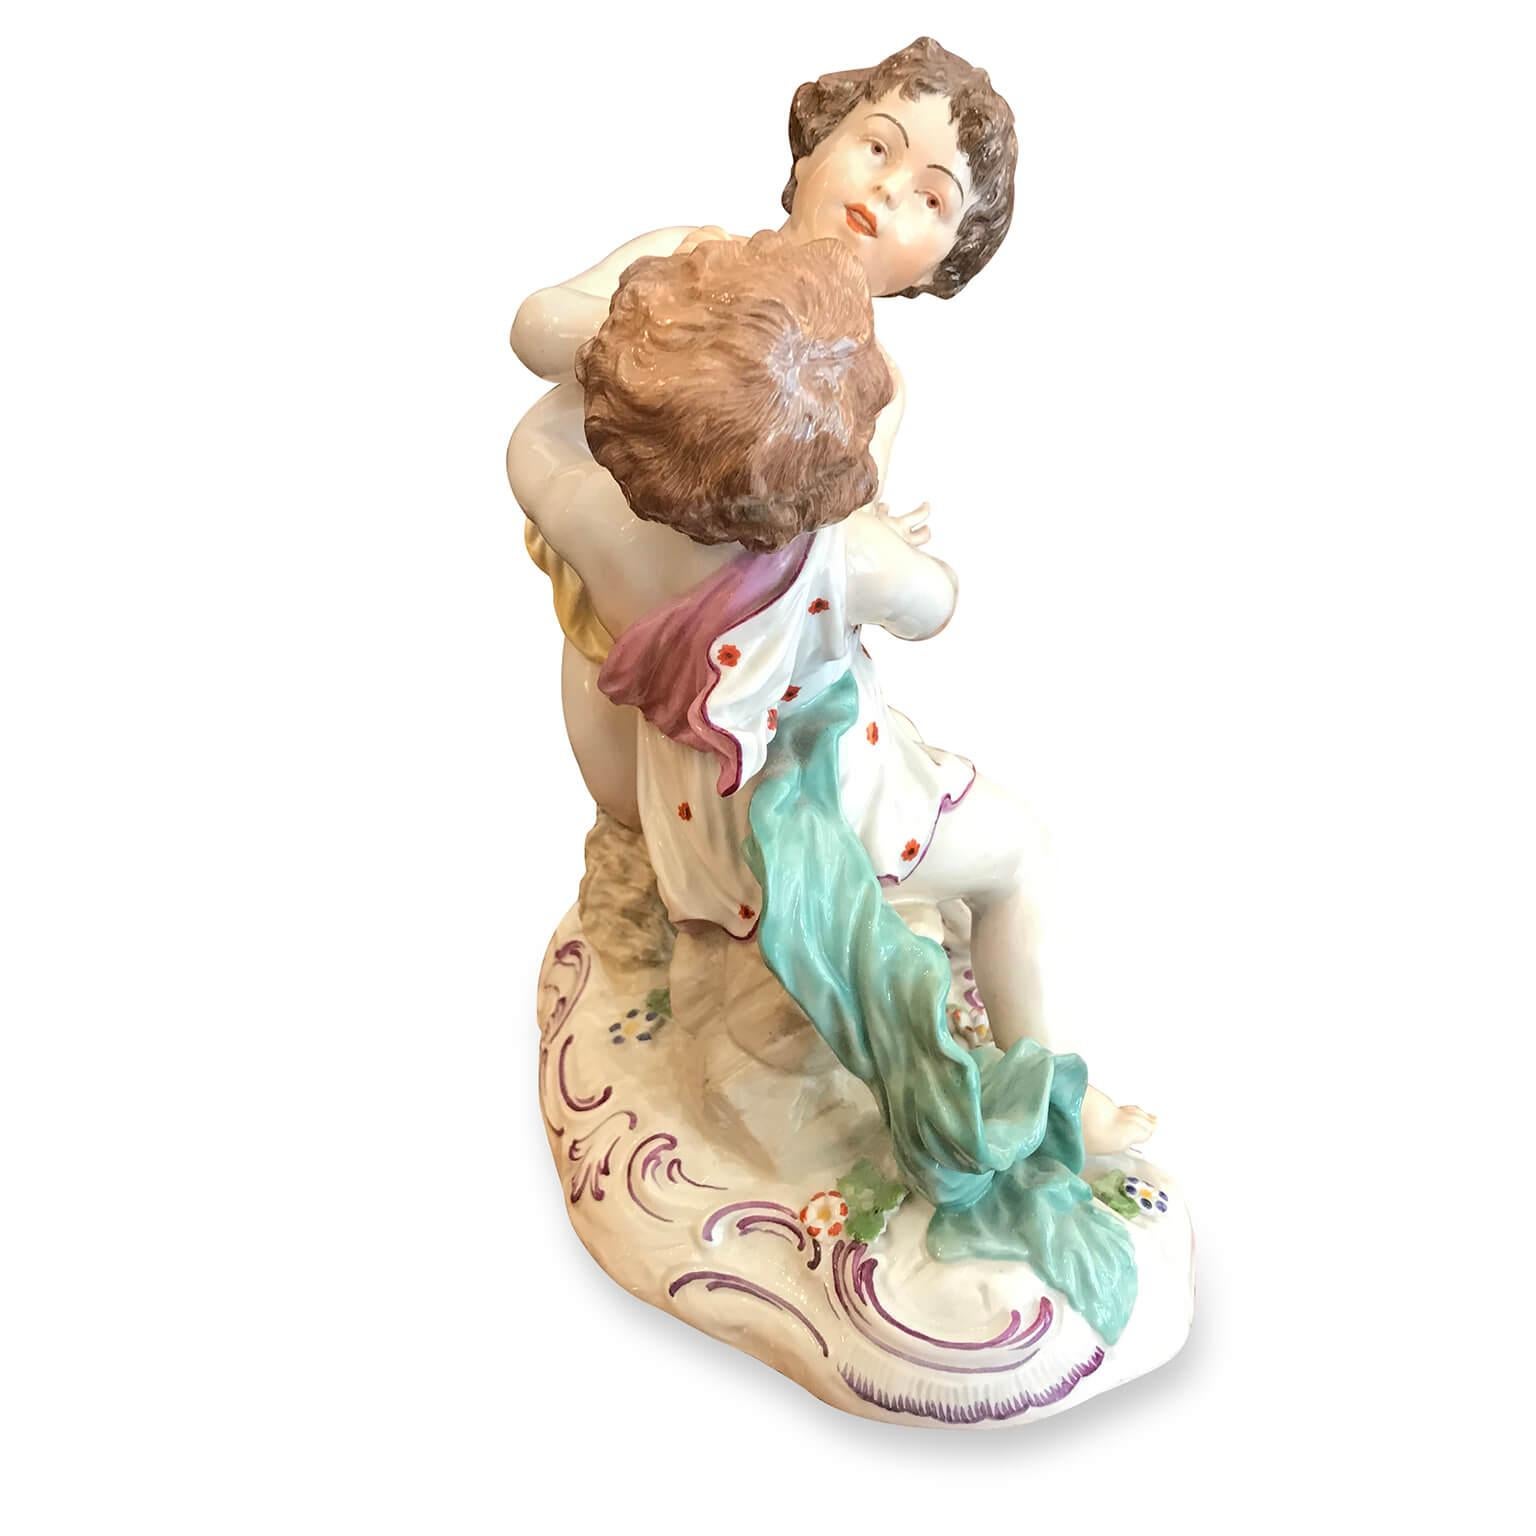 Hand-Painted 20th Century German Porcelain Group with Putti by Passau Manufacture For Sale